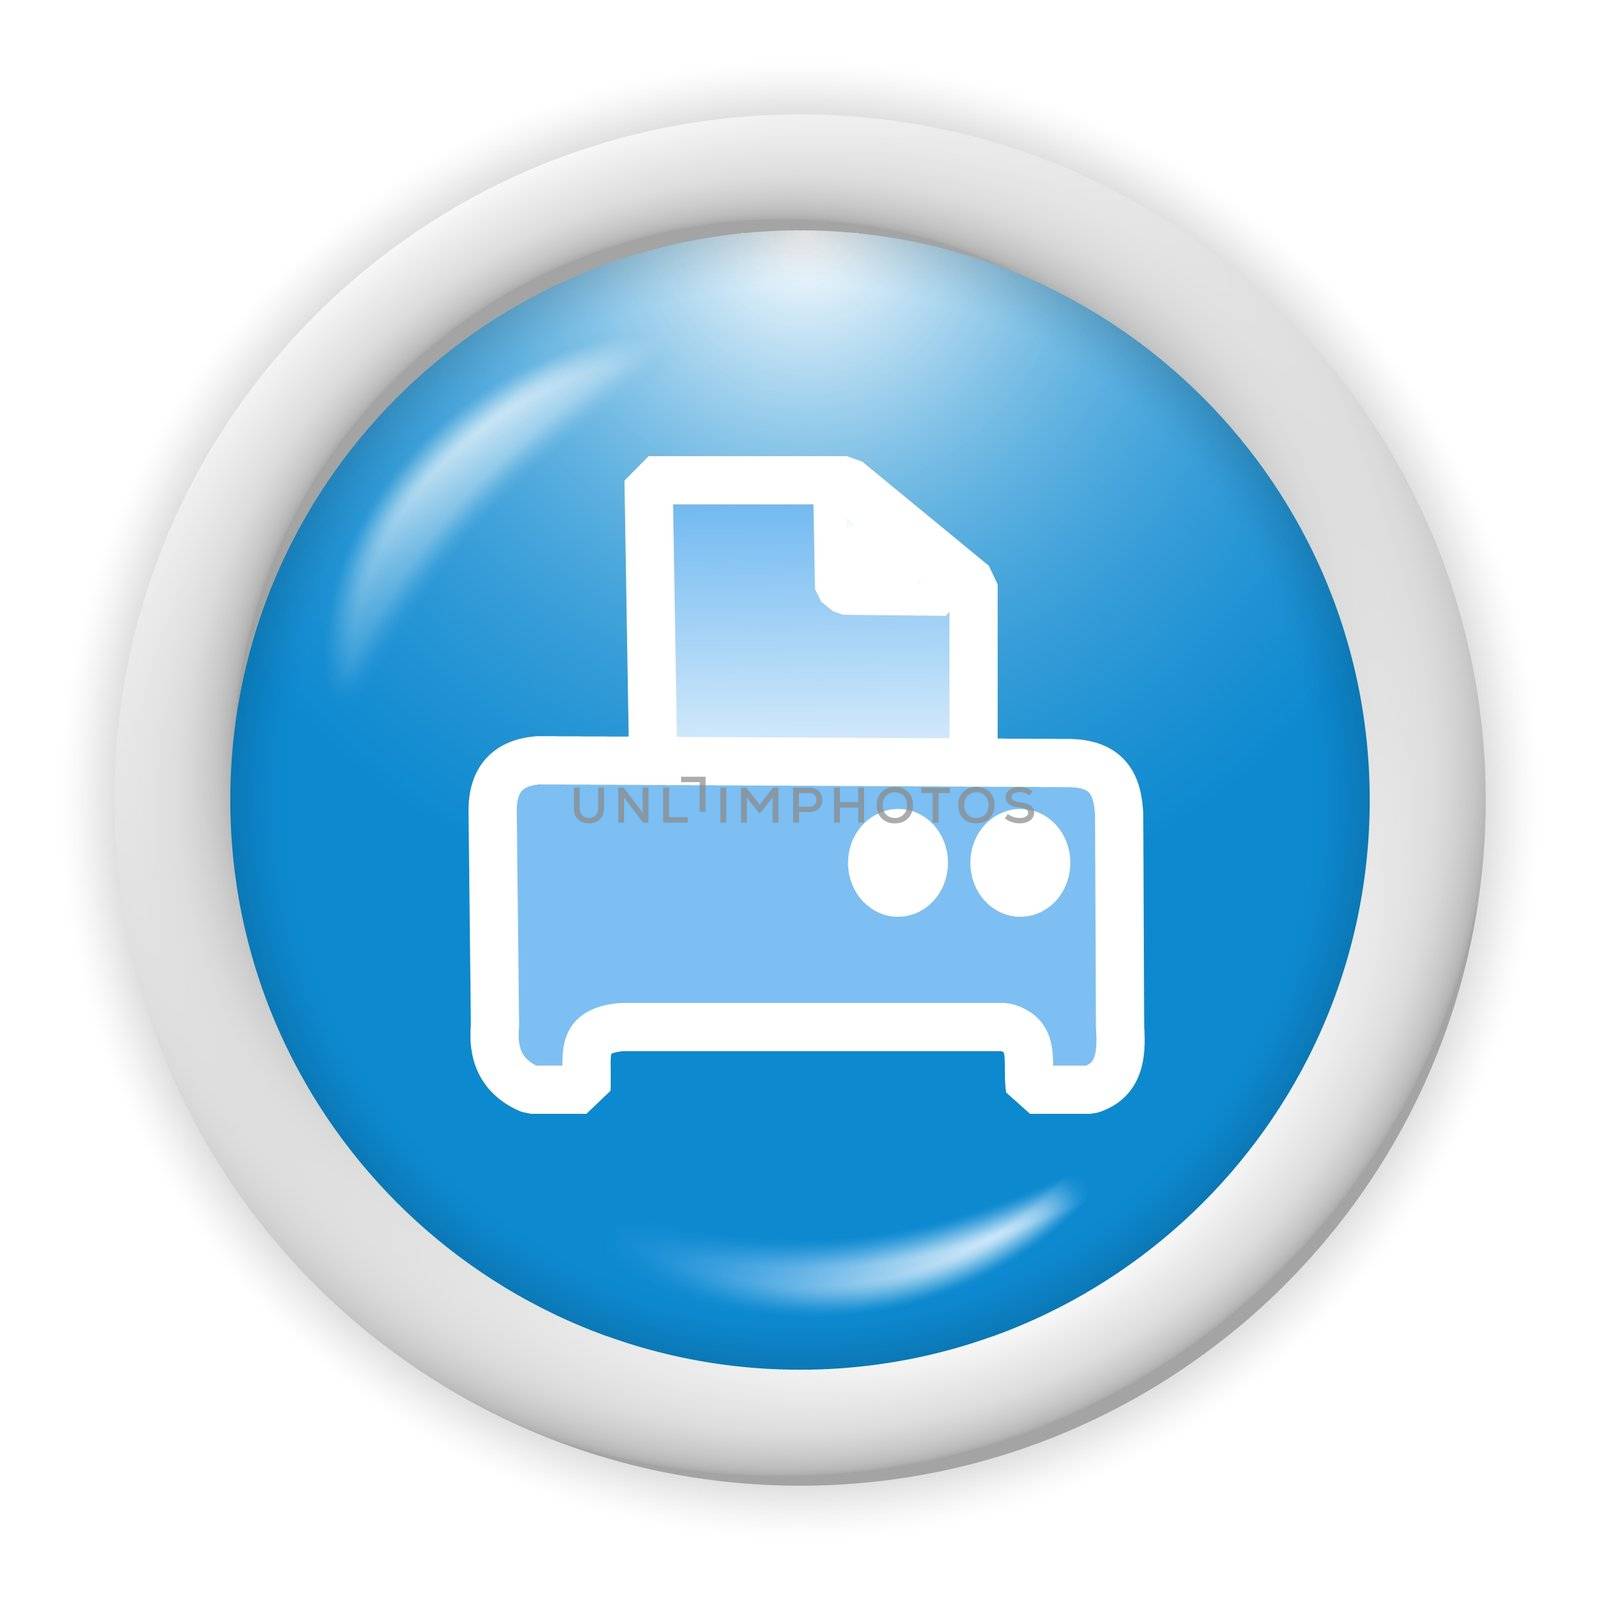 blue 3d printer icon - computer generated clipart